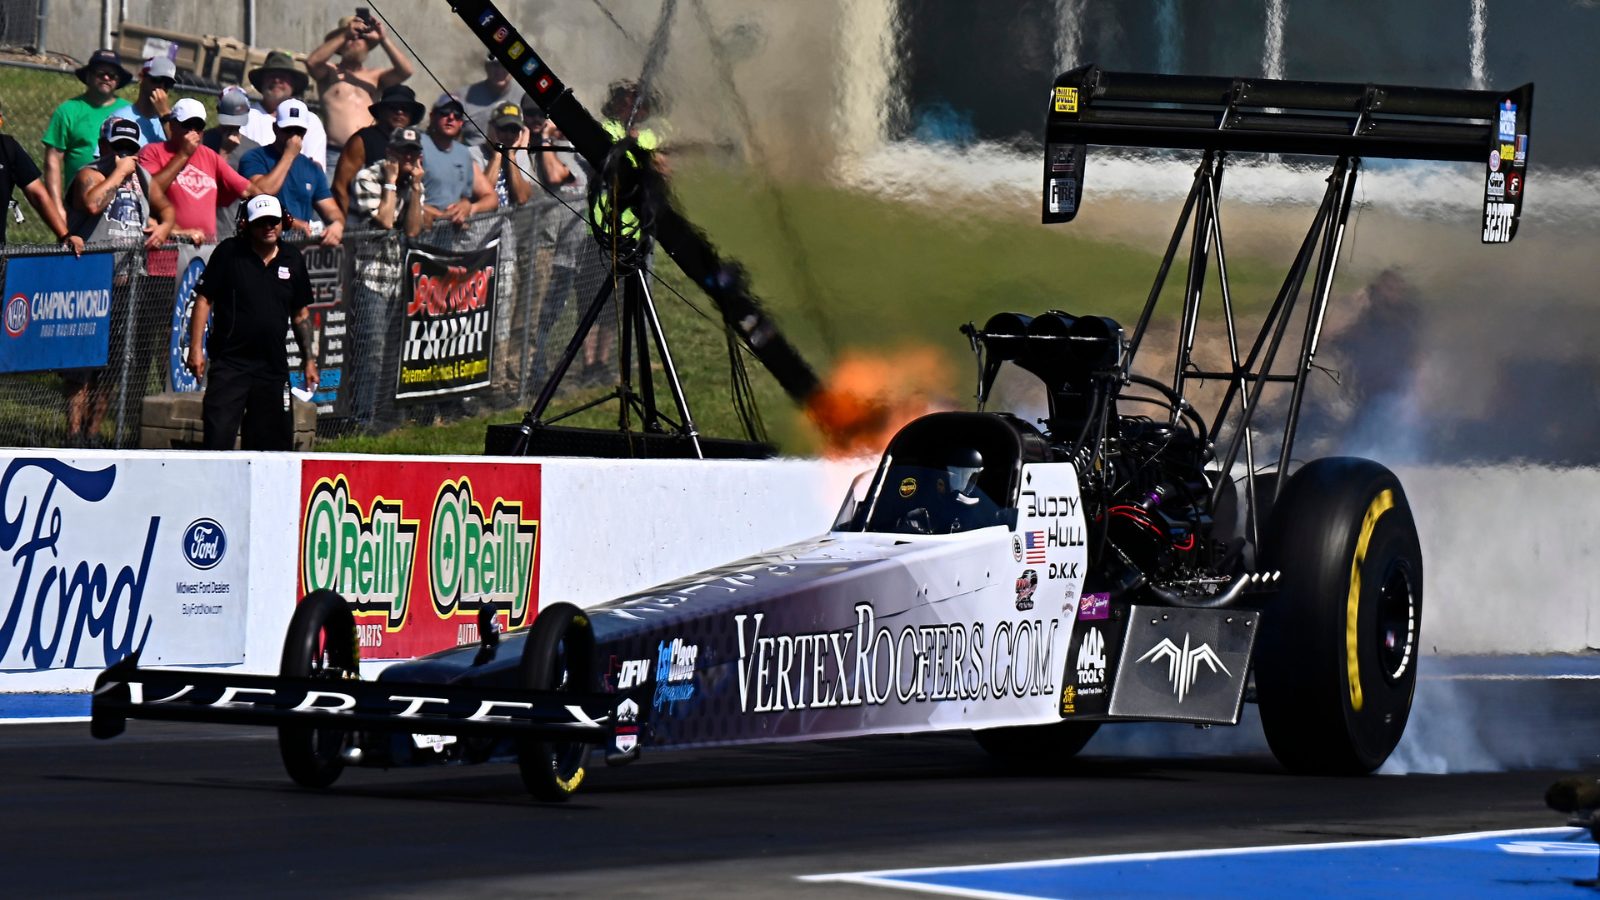   
																Top Fuel’s Buddy Hull Ready for NHRA Midwest Nationals 
															 